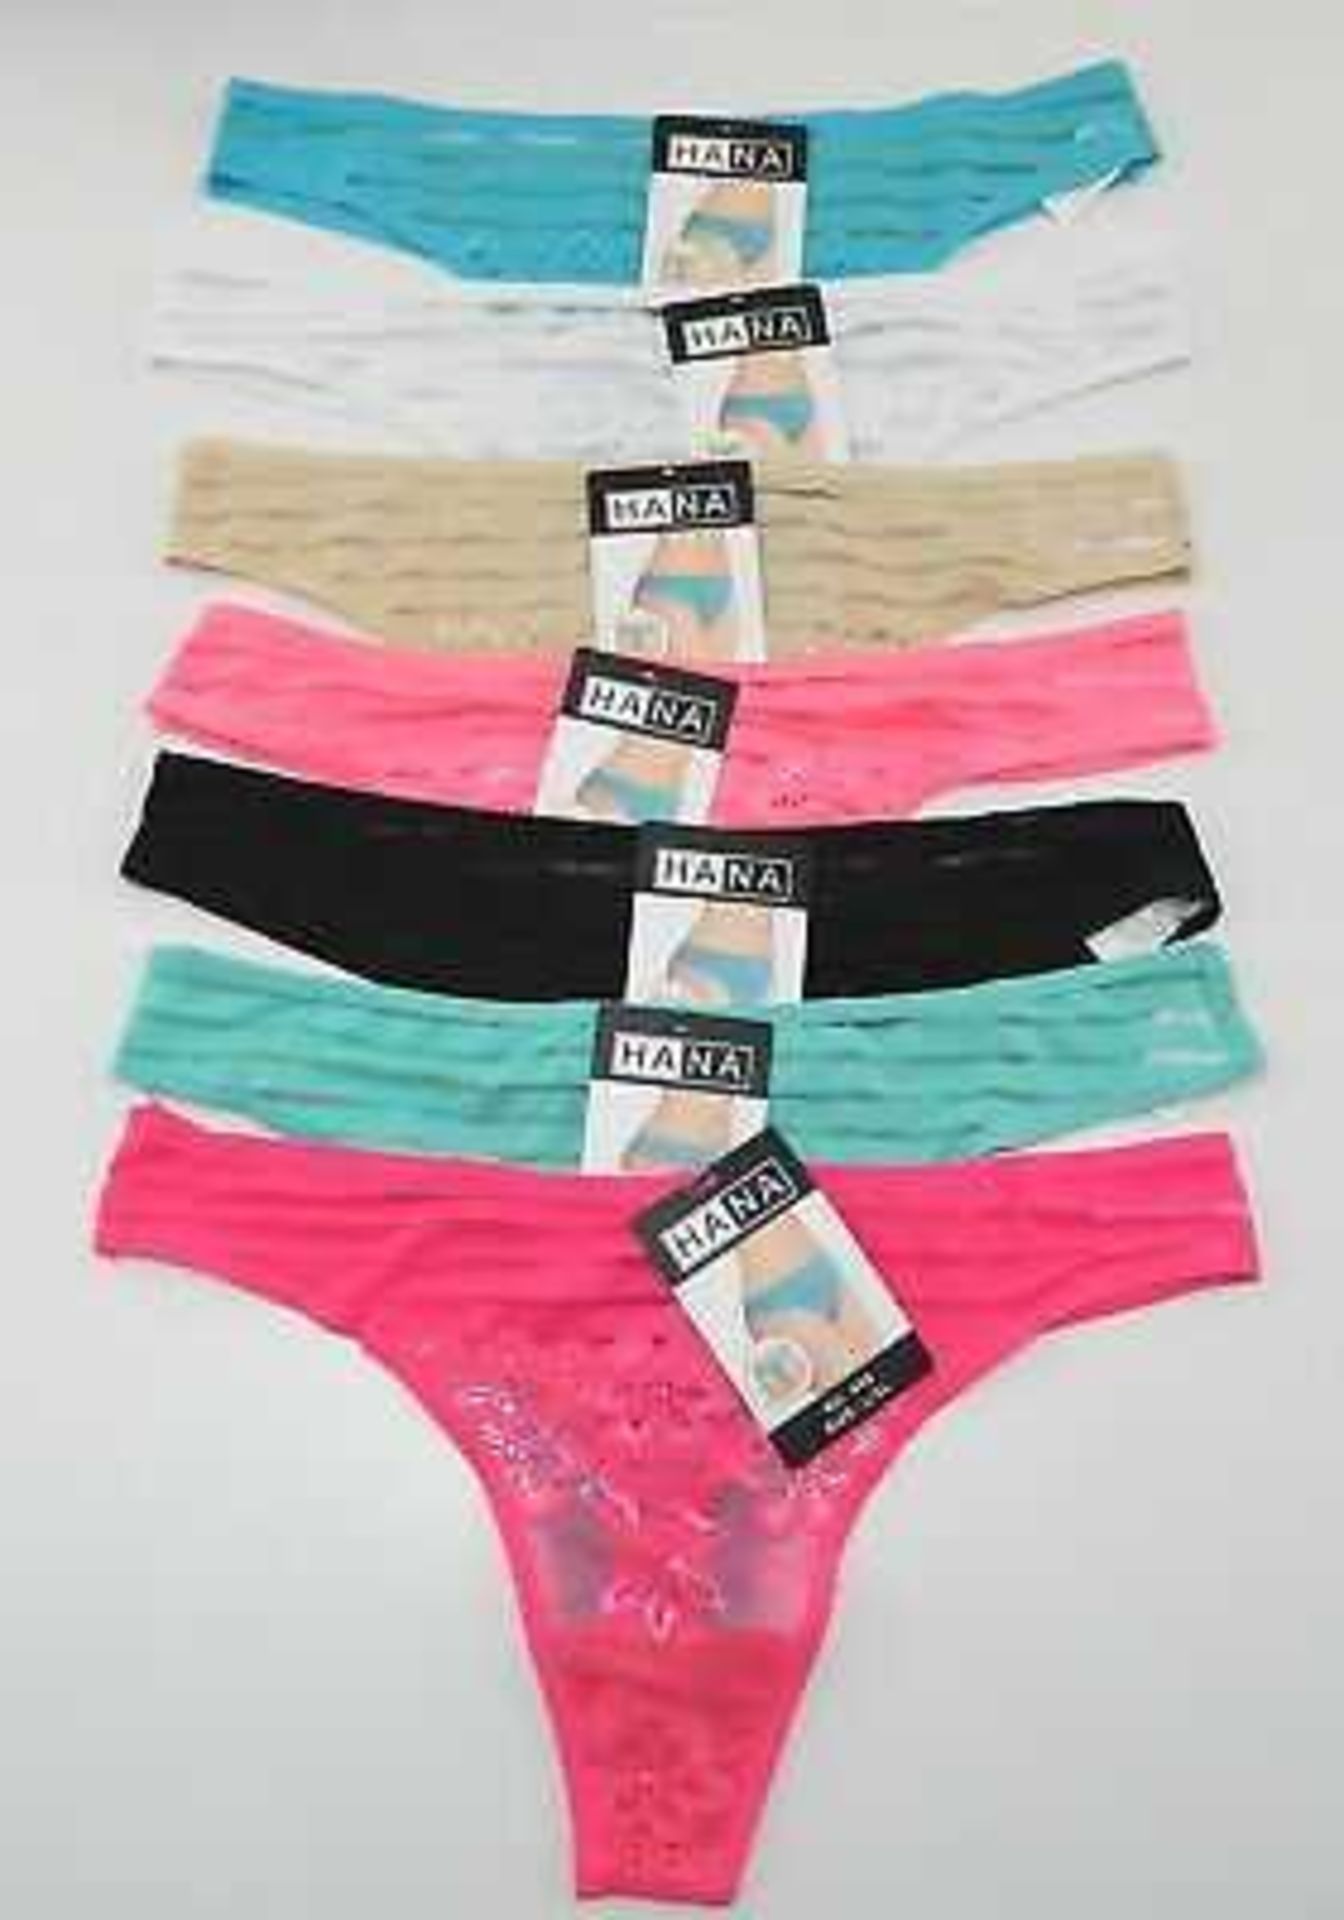 (Jb) RRP £360 Lot To Contain 12 Brand New Hana Lingerie Knickers In Assorted Sizes And Styles (